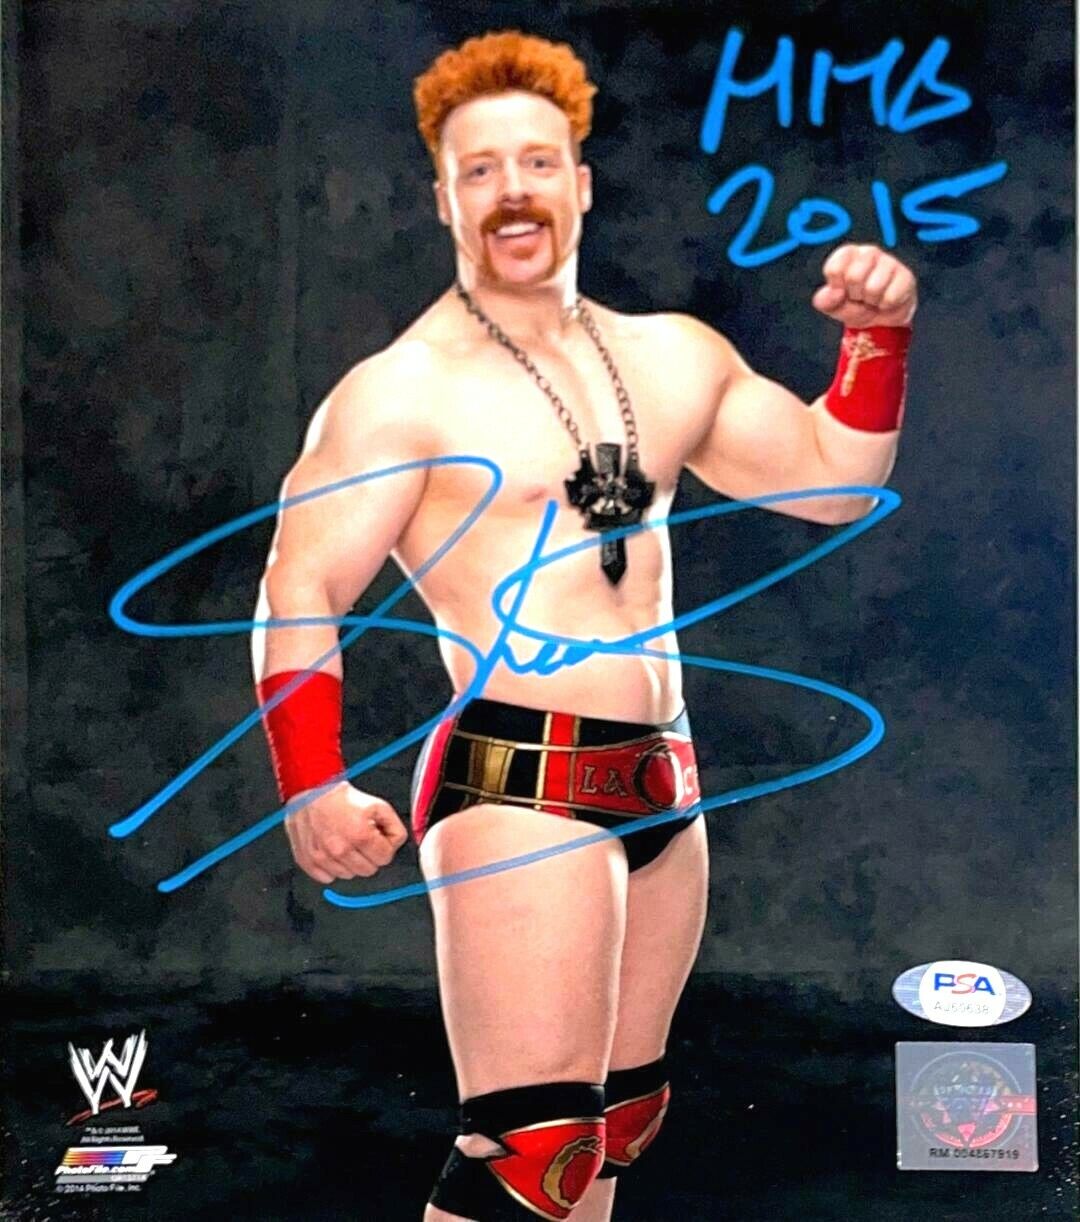 WWE SHEAMUS HAND SIGNED AUTOGRAPHED 8X10 Photo Poster painting WITH PROOF AND PSA DNA COA 14